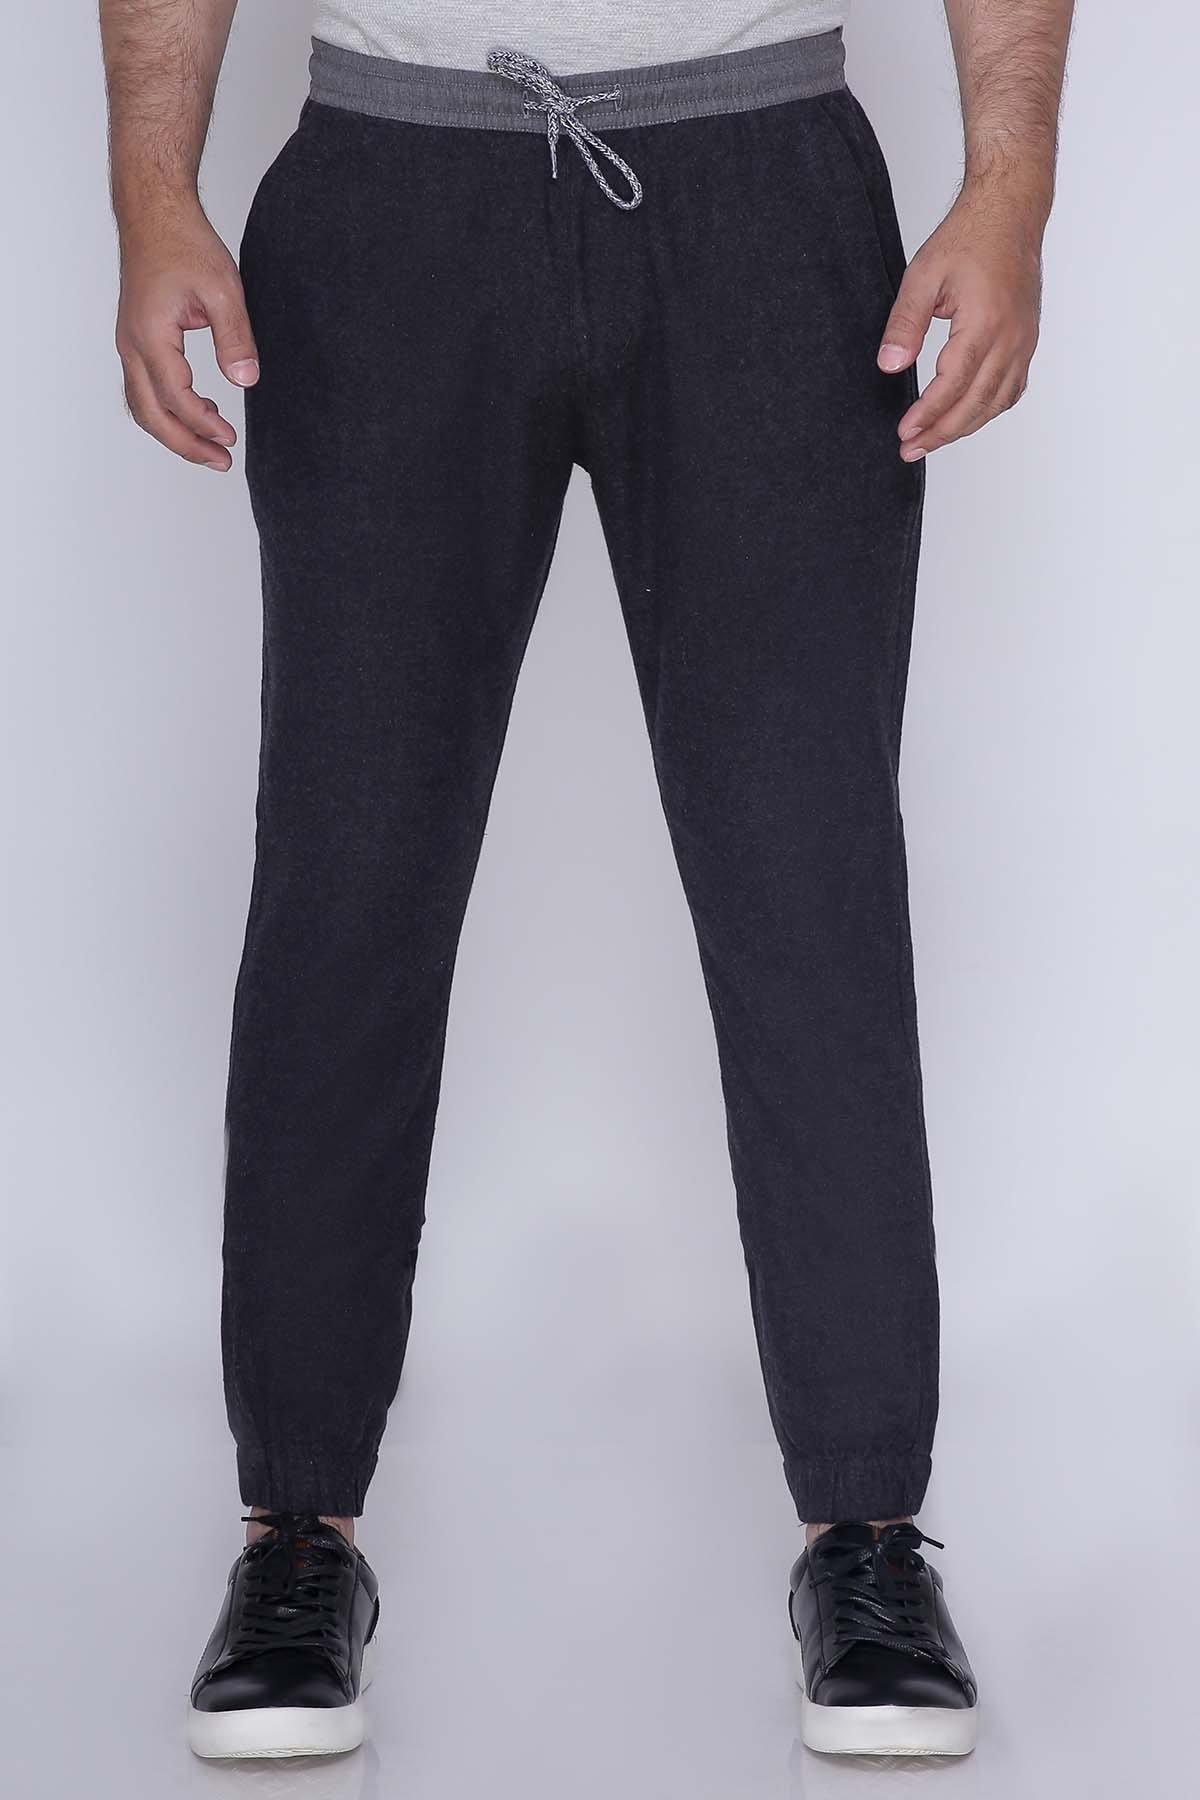 CASUAL TROUSER CHARCOAL at Charcoal Clothing